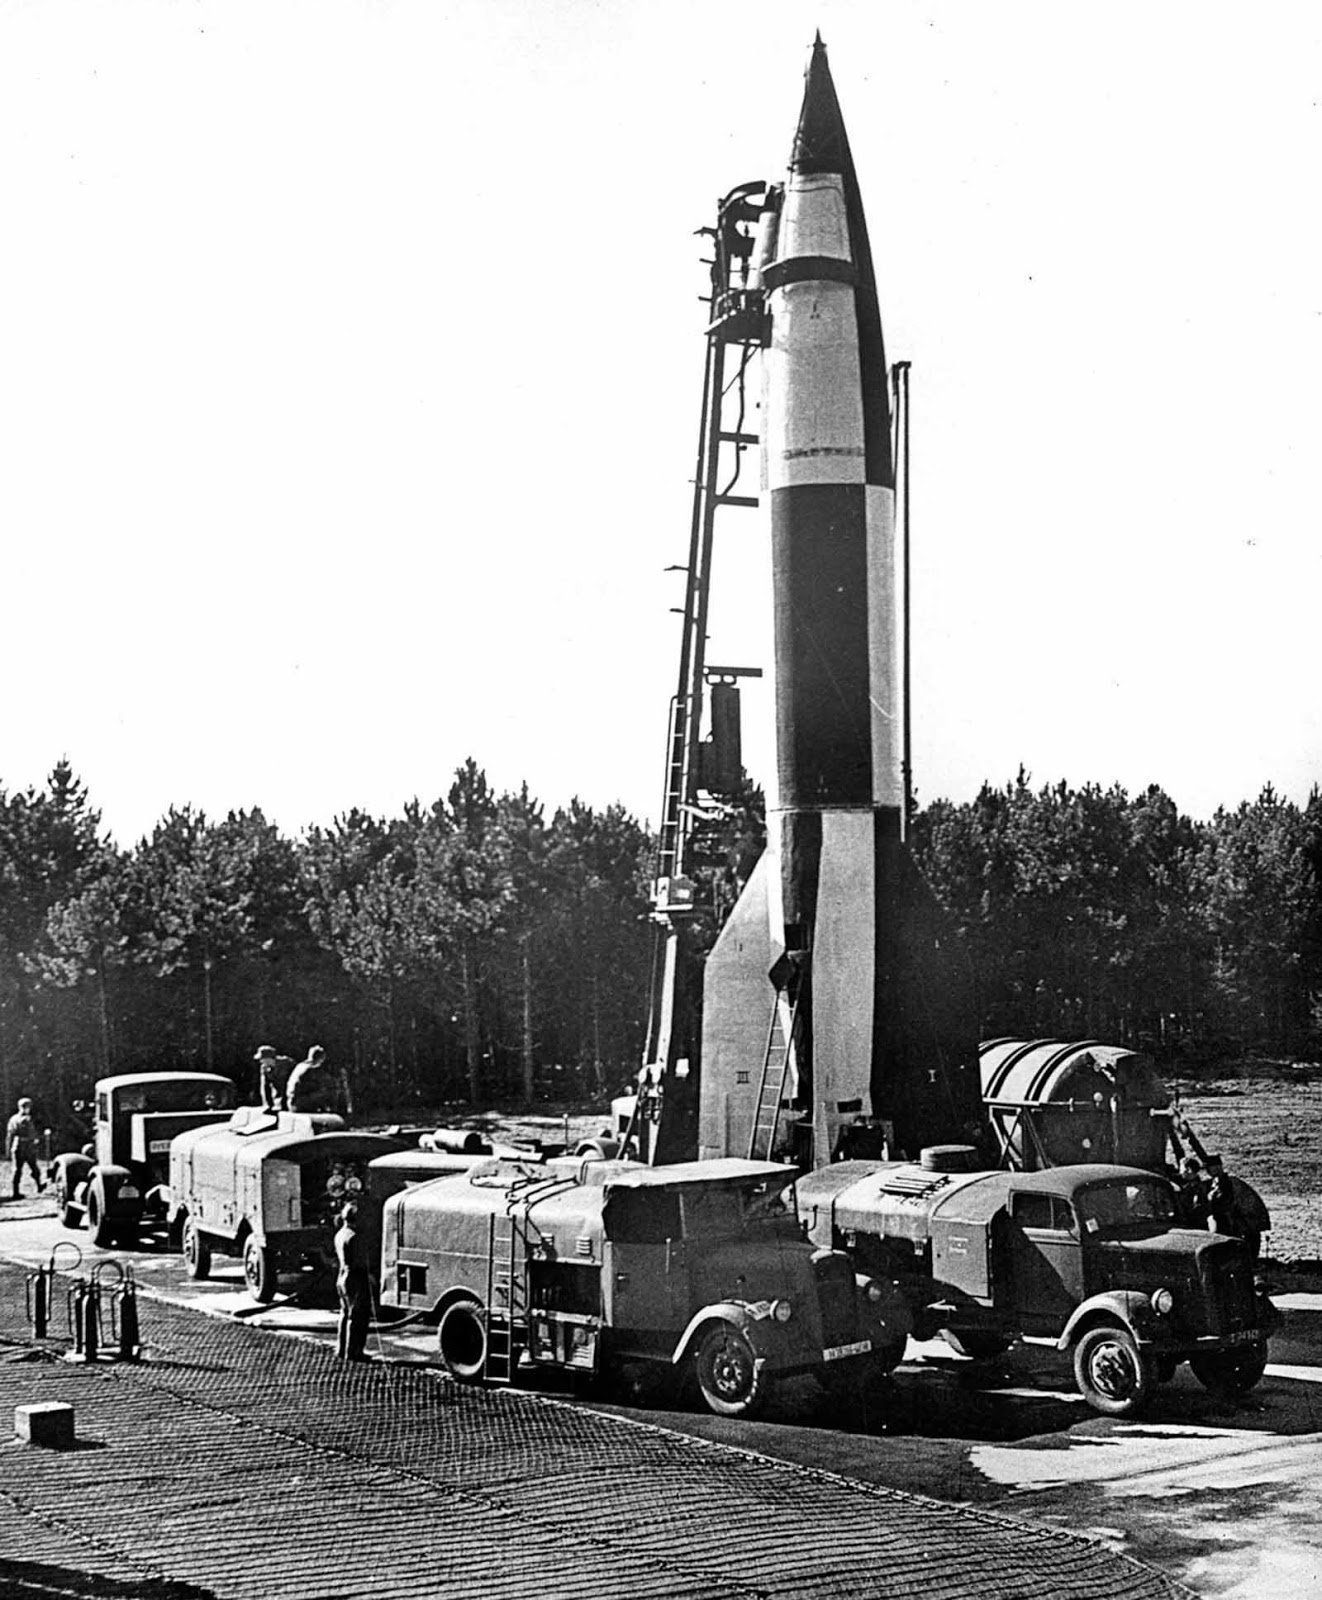 A V-2 rocket is prepared for launch in Cuxhaven, Germany. 1944.